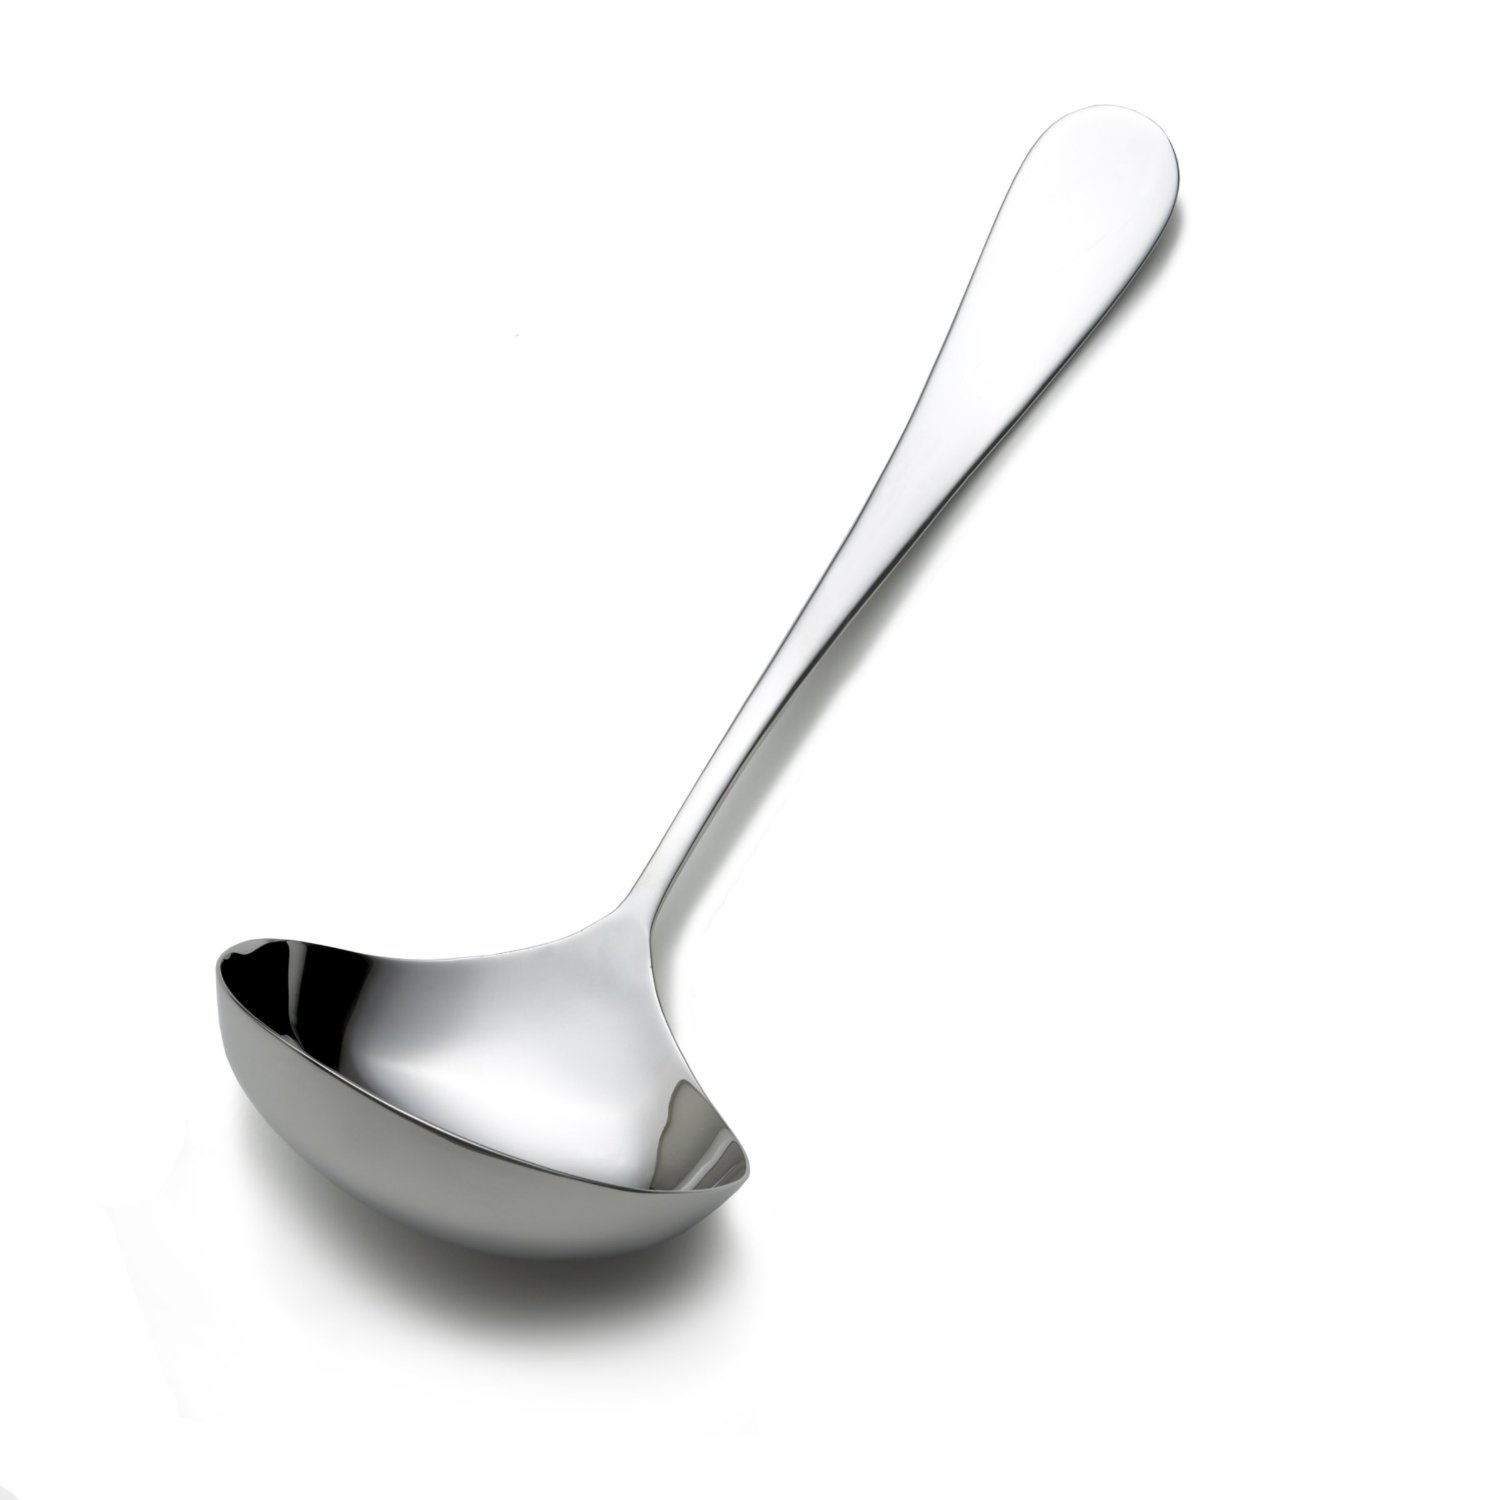 soup ladle meaning